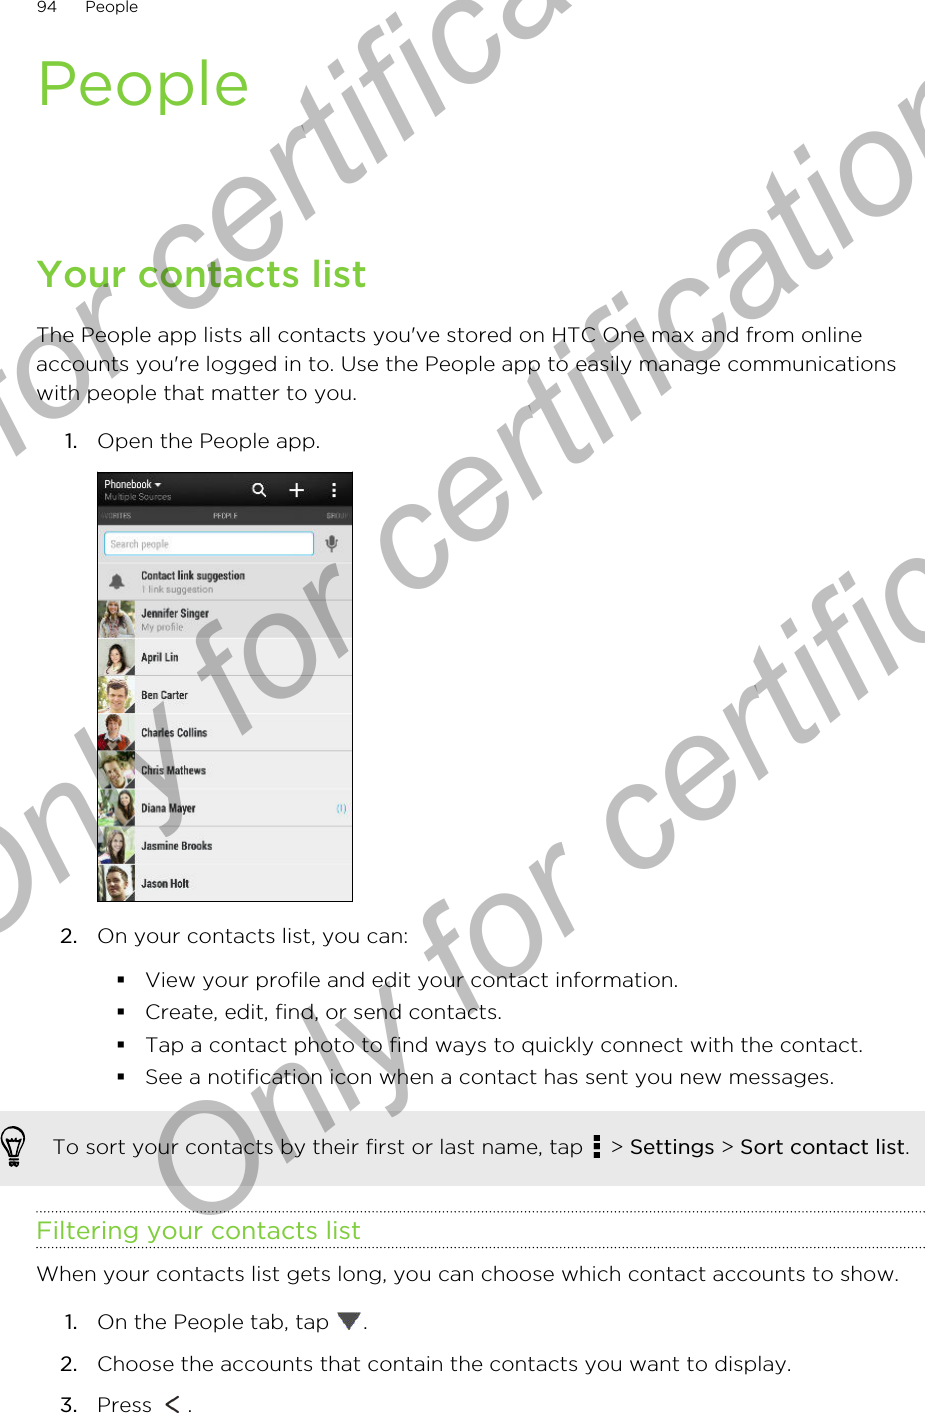 PeopleYour contacts listThe People app lists all contacts you&apos;ve stored on HTC One max and from onlineaccounts you&apos;re logged in to. Use the People app to easily manage communicationswith people that matter to you.1. Open the People app. 2. On your contacts list, you can:§View your profile and edit your contact information.§Create, edit, find, or send contacts.§Tap a contact photo to find ways to quickly connect with the contact.§See a notification icon when a contact has sent you new messages.To sort your contacts by their first or last name, tap   &gt; Settings &gt; Sort contact list.Filtering your contacts listWhen your contacts list gets long, you can choose which contact accounts to show.1. On the People tab, tap  .2. Choose the accounts that contain the contacts you want to display.3. Press  .94 PeopleOnly for certification  Only for certification  Only for certification